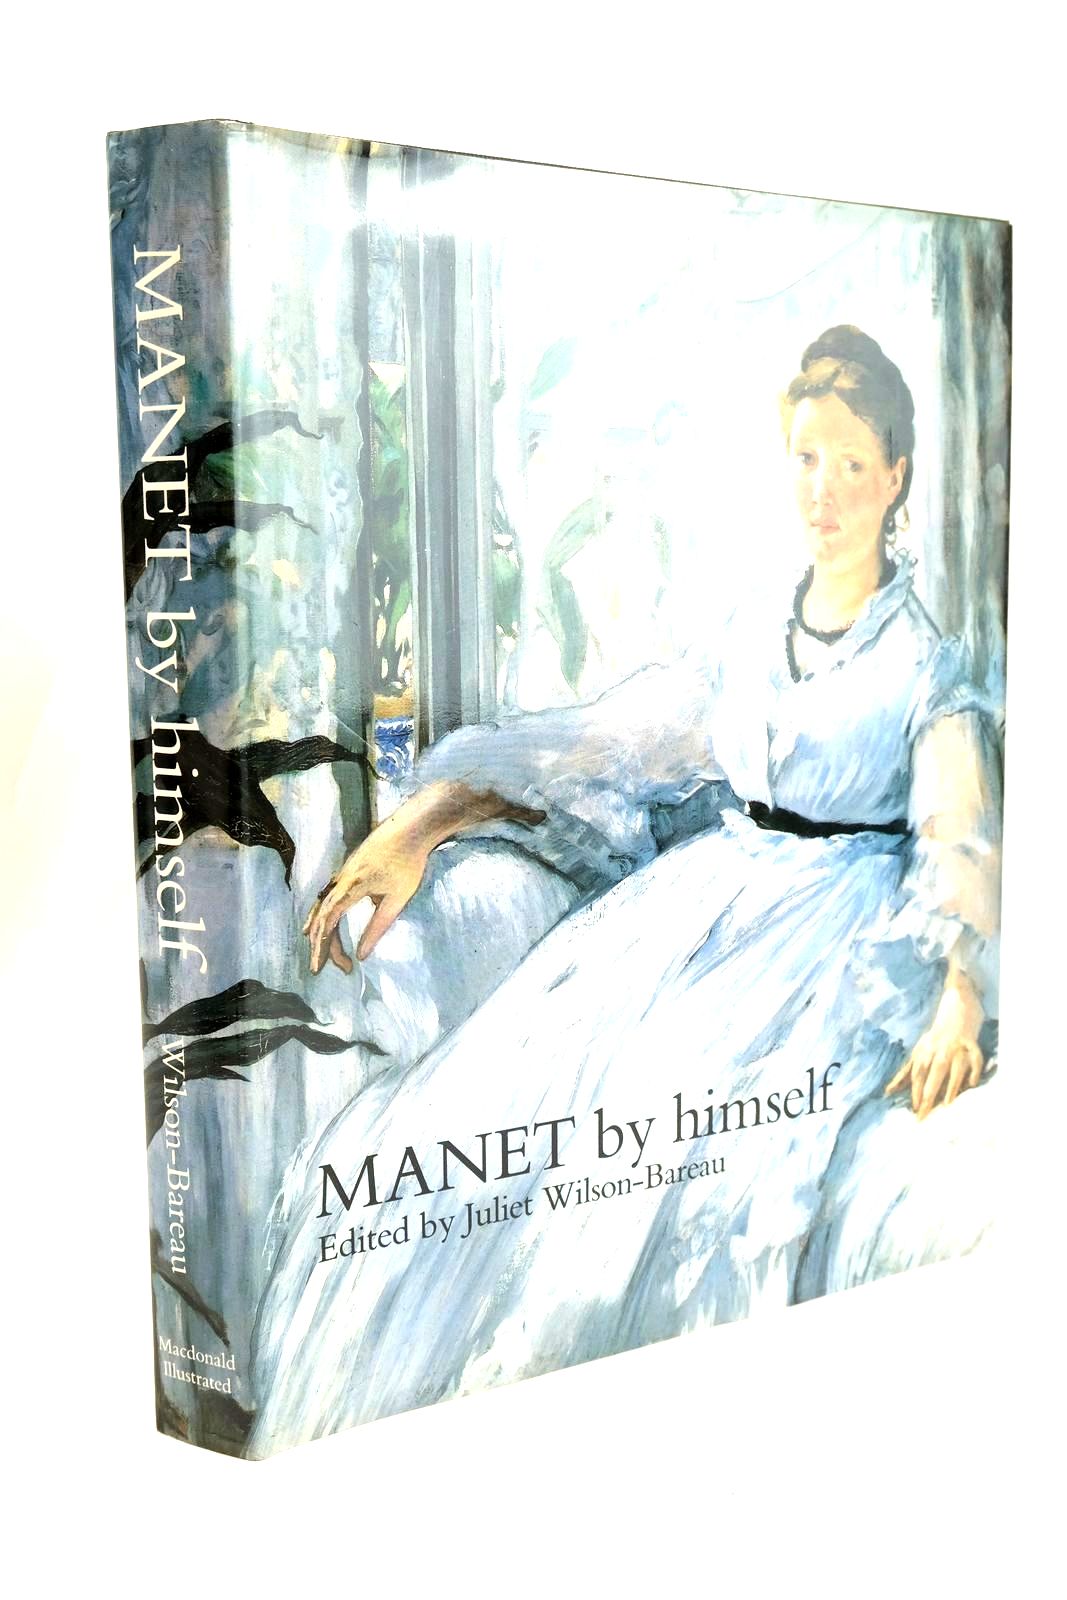 Photo of MANET BY HIMSELF written by Wilson-Bareau, Juliet illustrated by Manet, Edouard published by MacDonald (STOCK CODE: 1327173)  for sale by Stella & Rose's Books